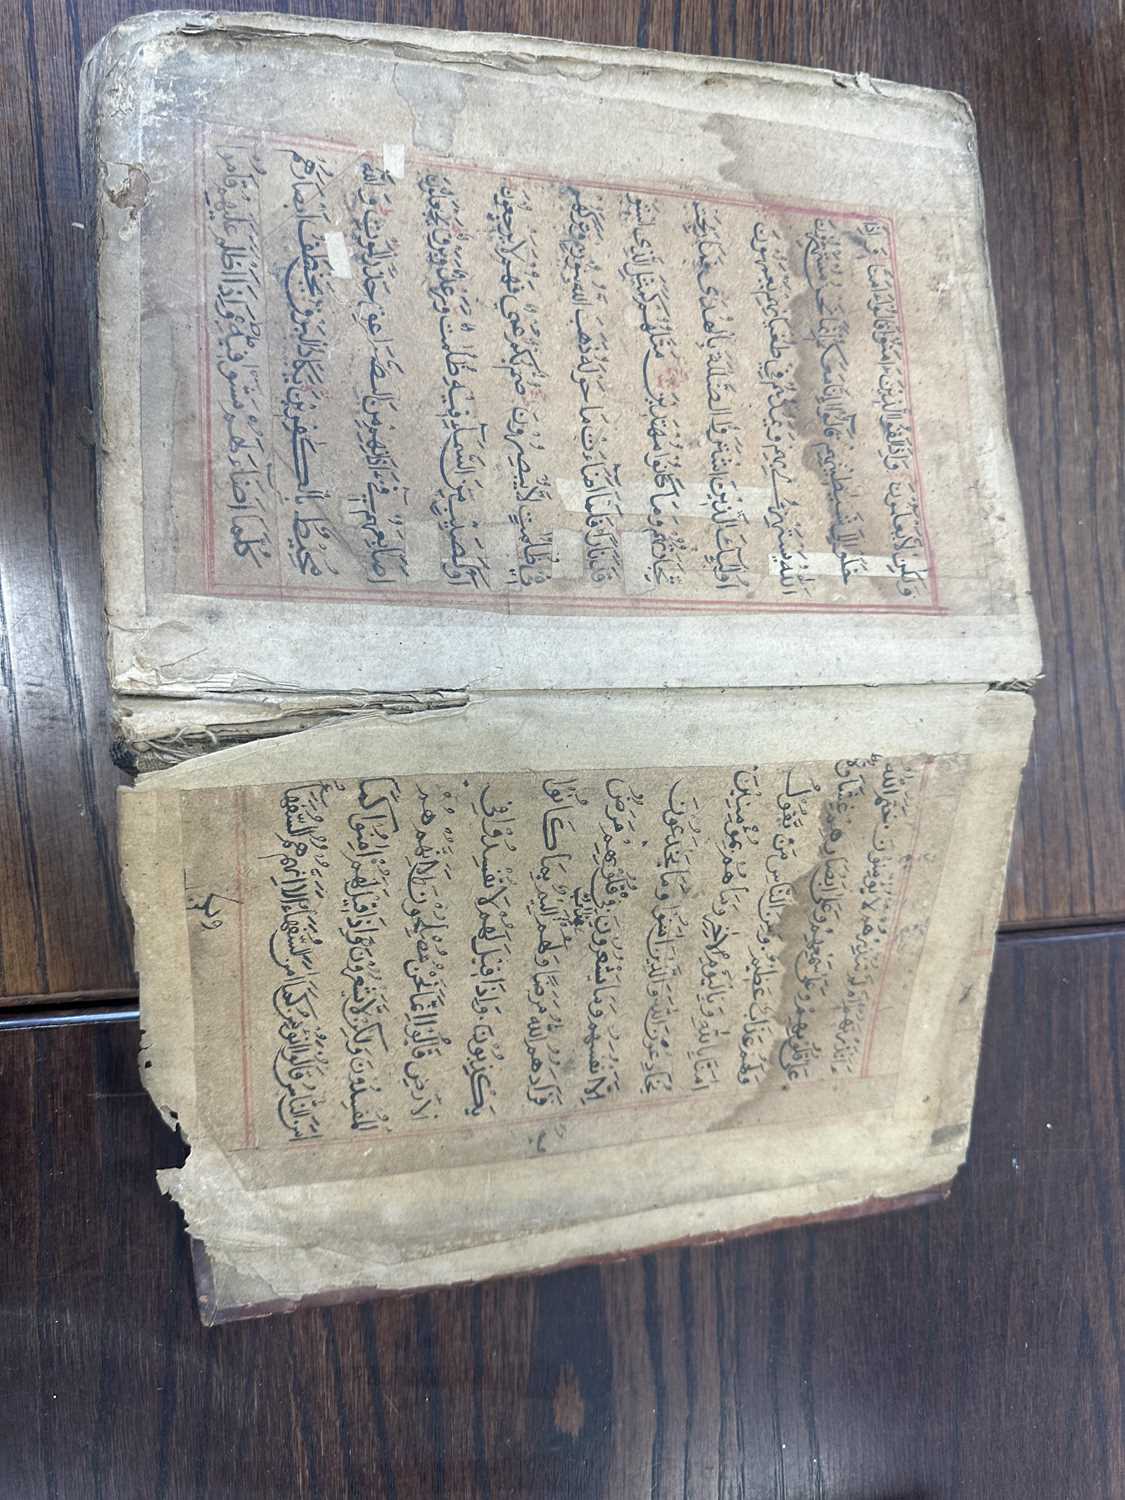 AN EARLY COPY OF THE KORAN LEATHER BOUND BOOK - Image 23 of 44